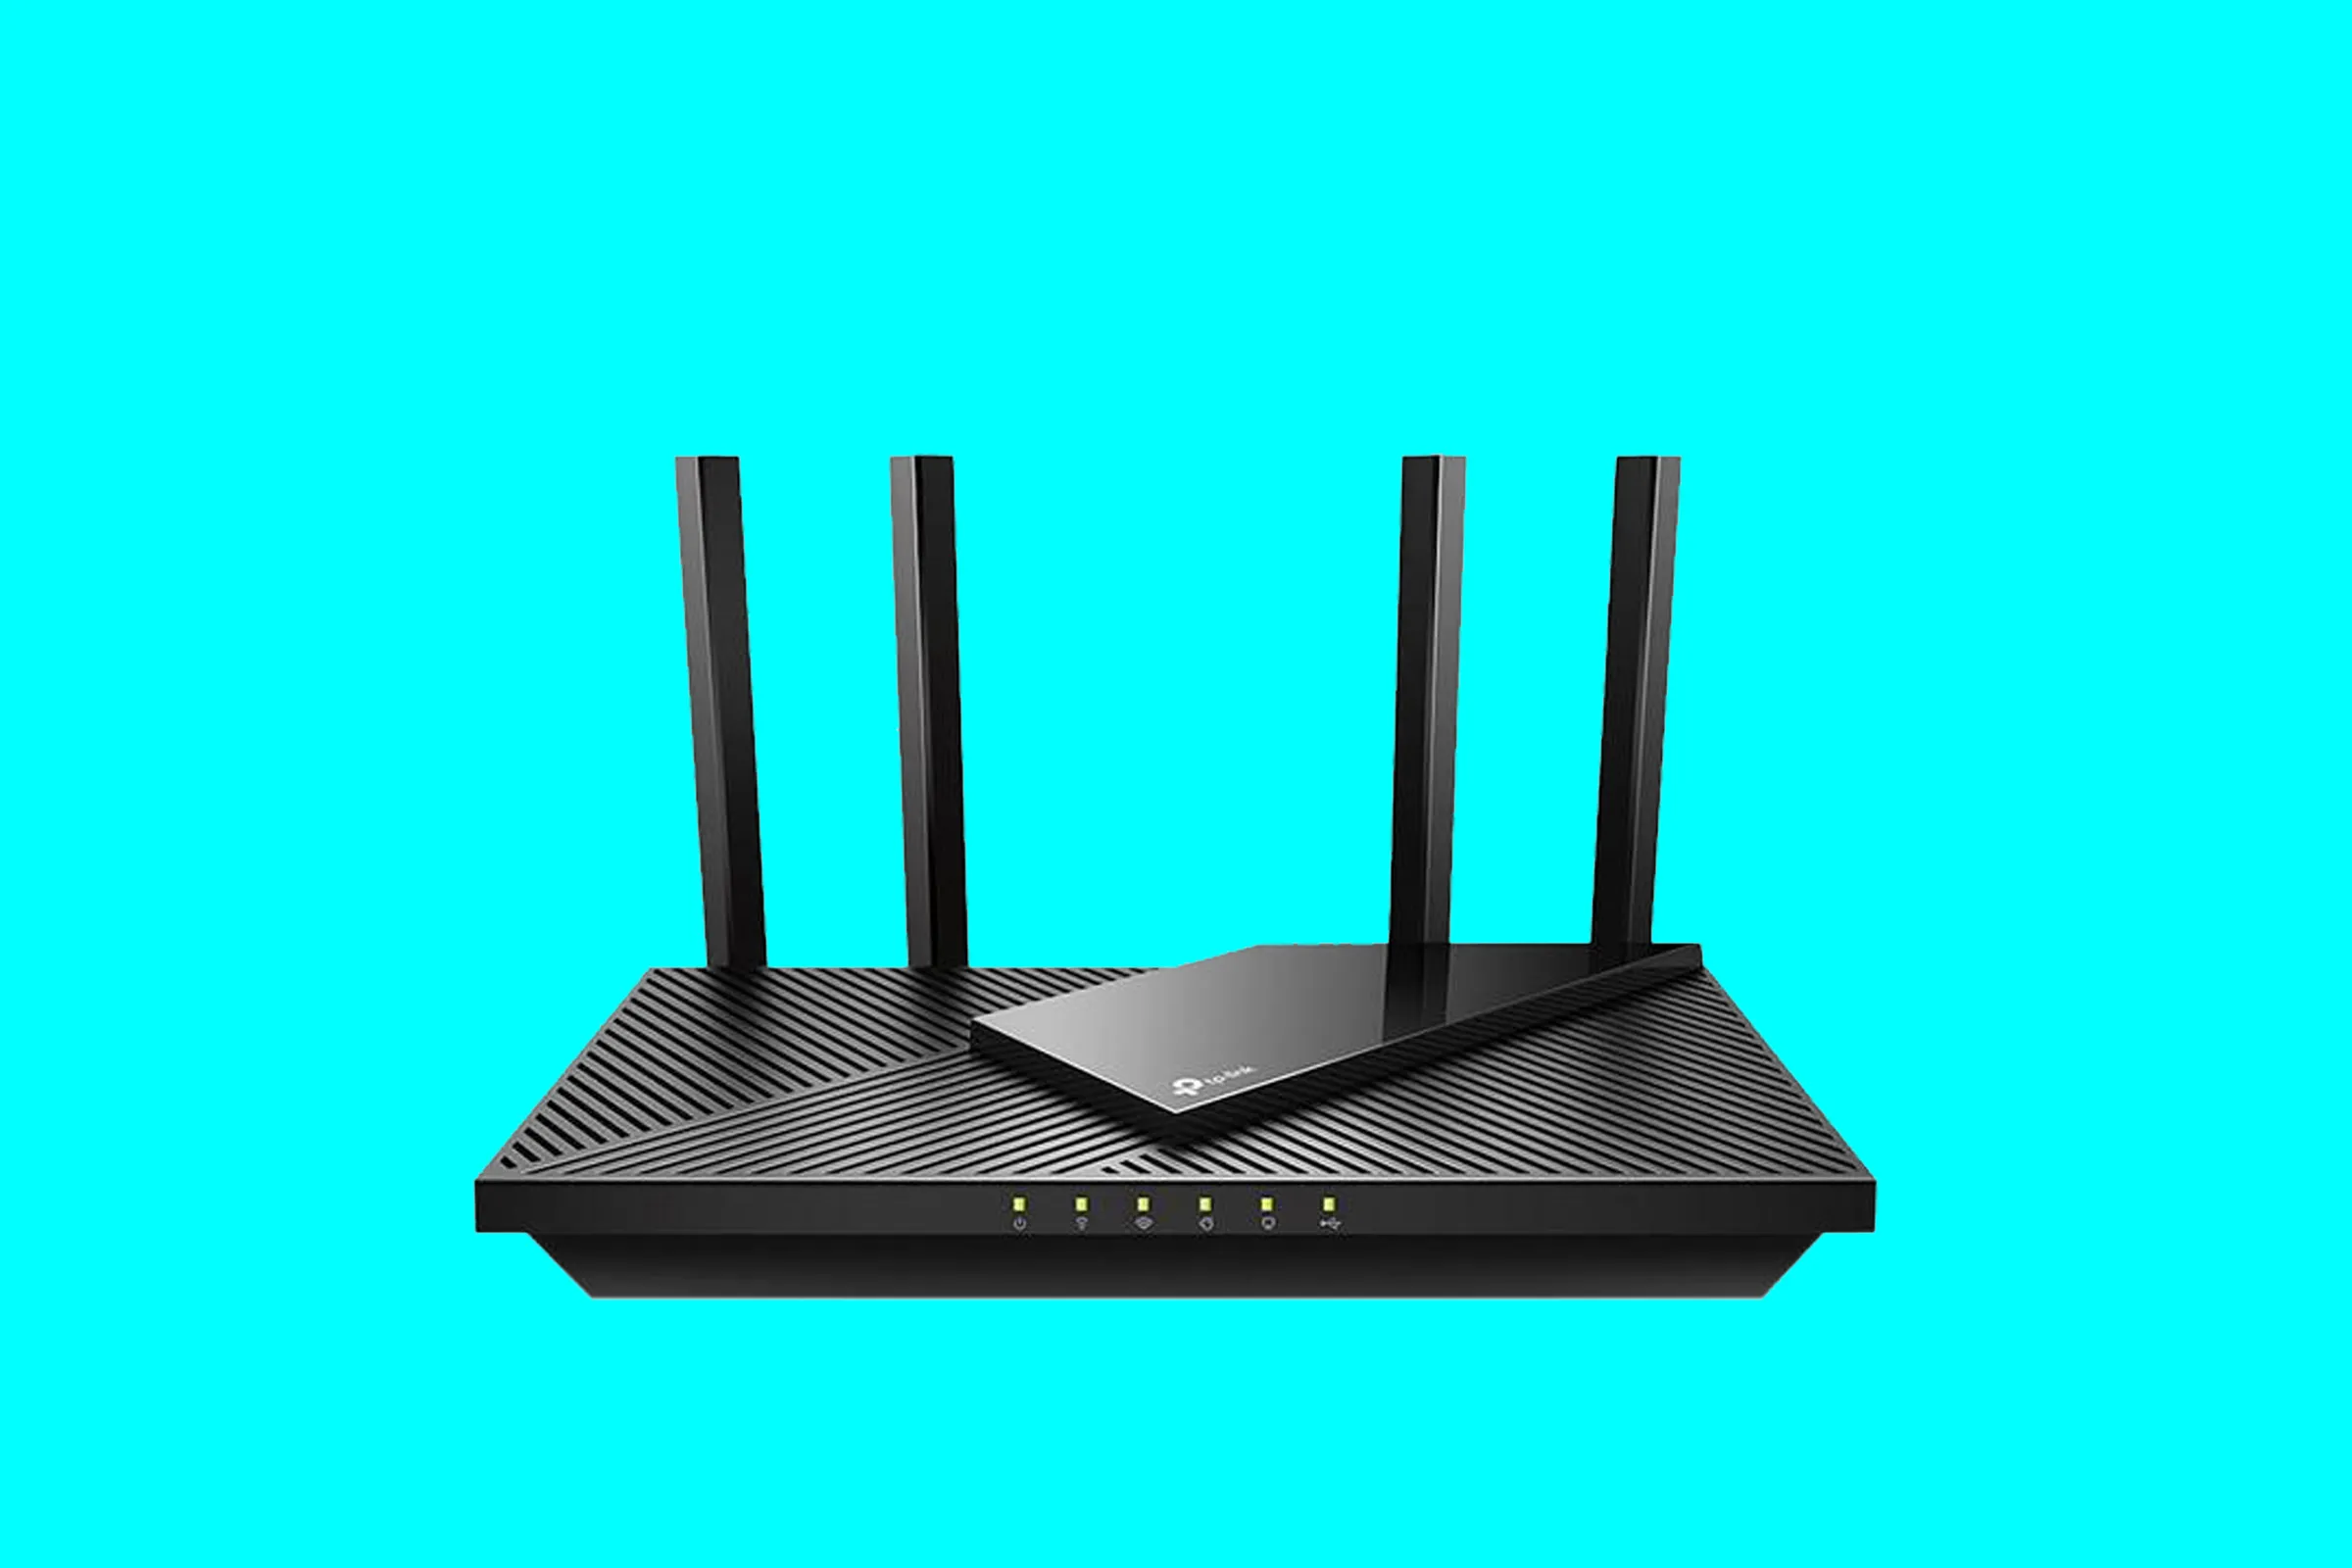 Top 5 Features to Look for in a Router’s Interface